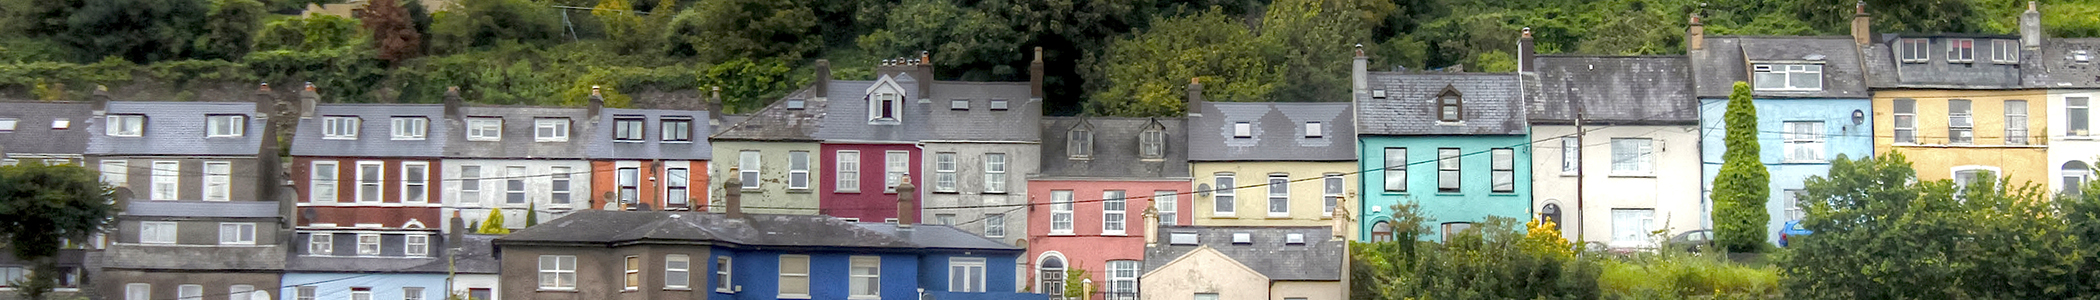 Man and woman arrested after pensioner beaten - Cork Beo